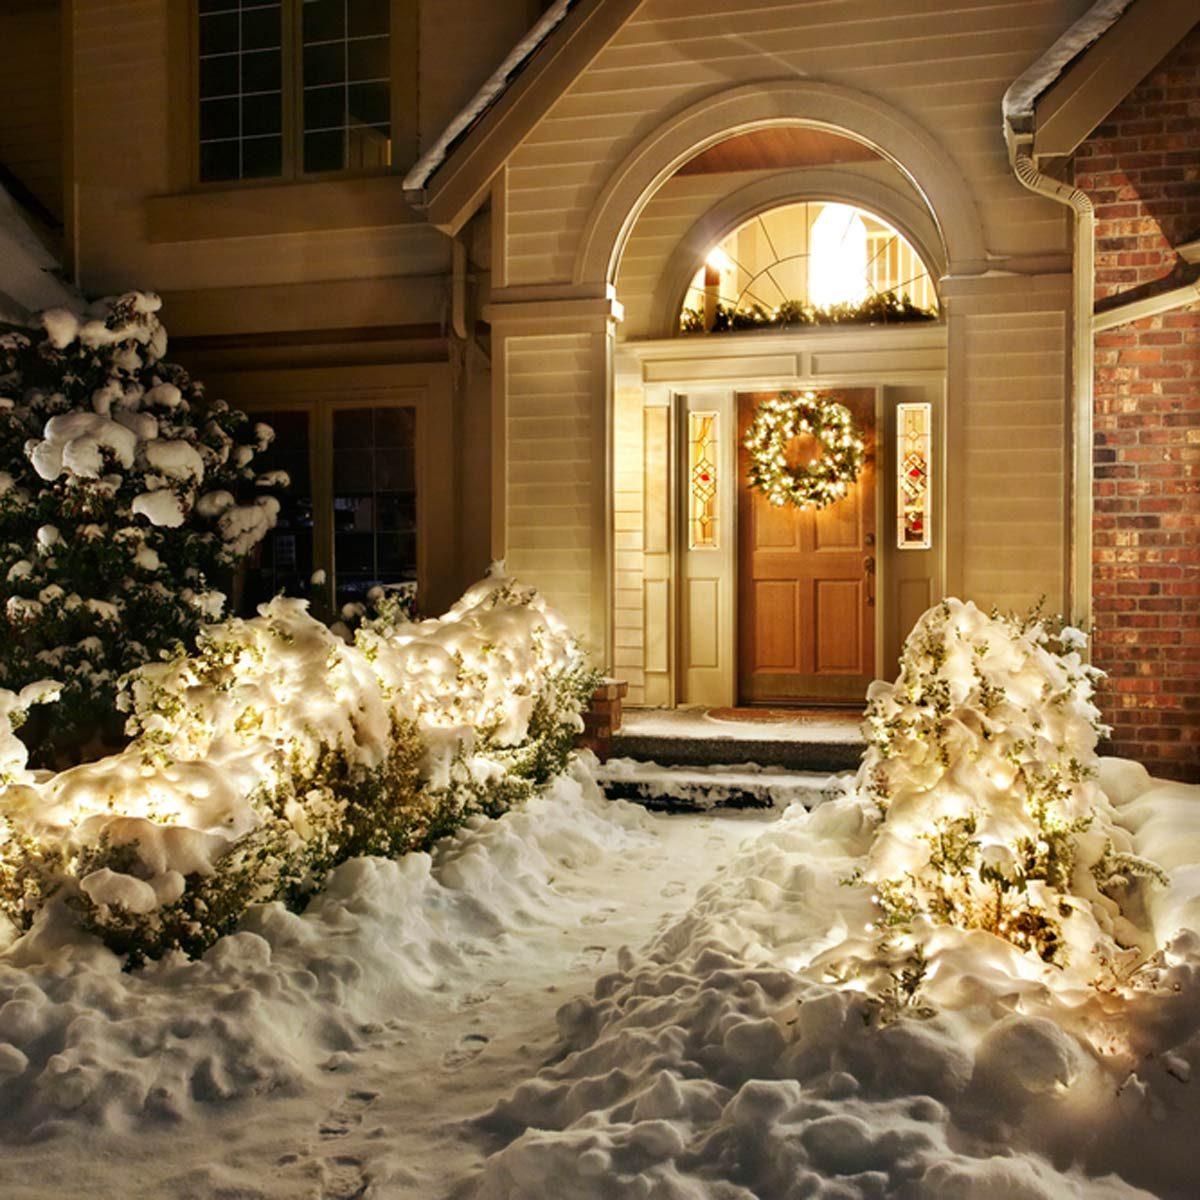 Homeowner's Guide for Holiday Lighting